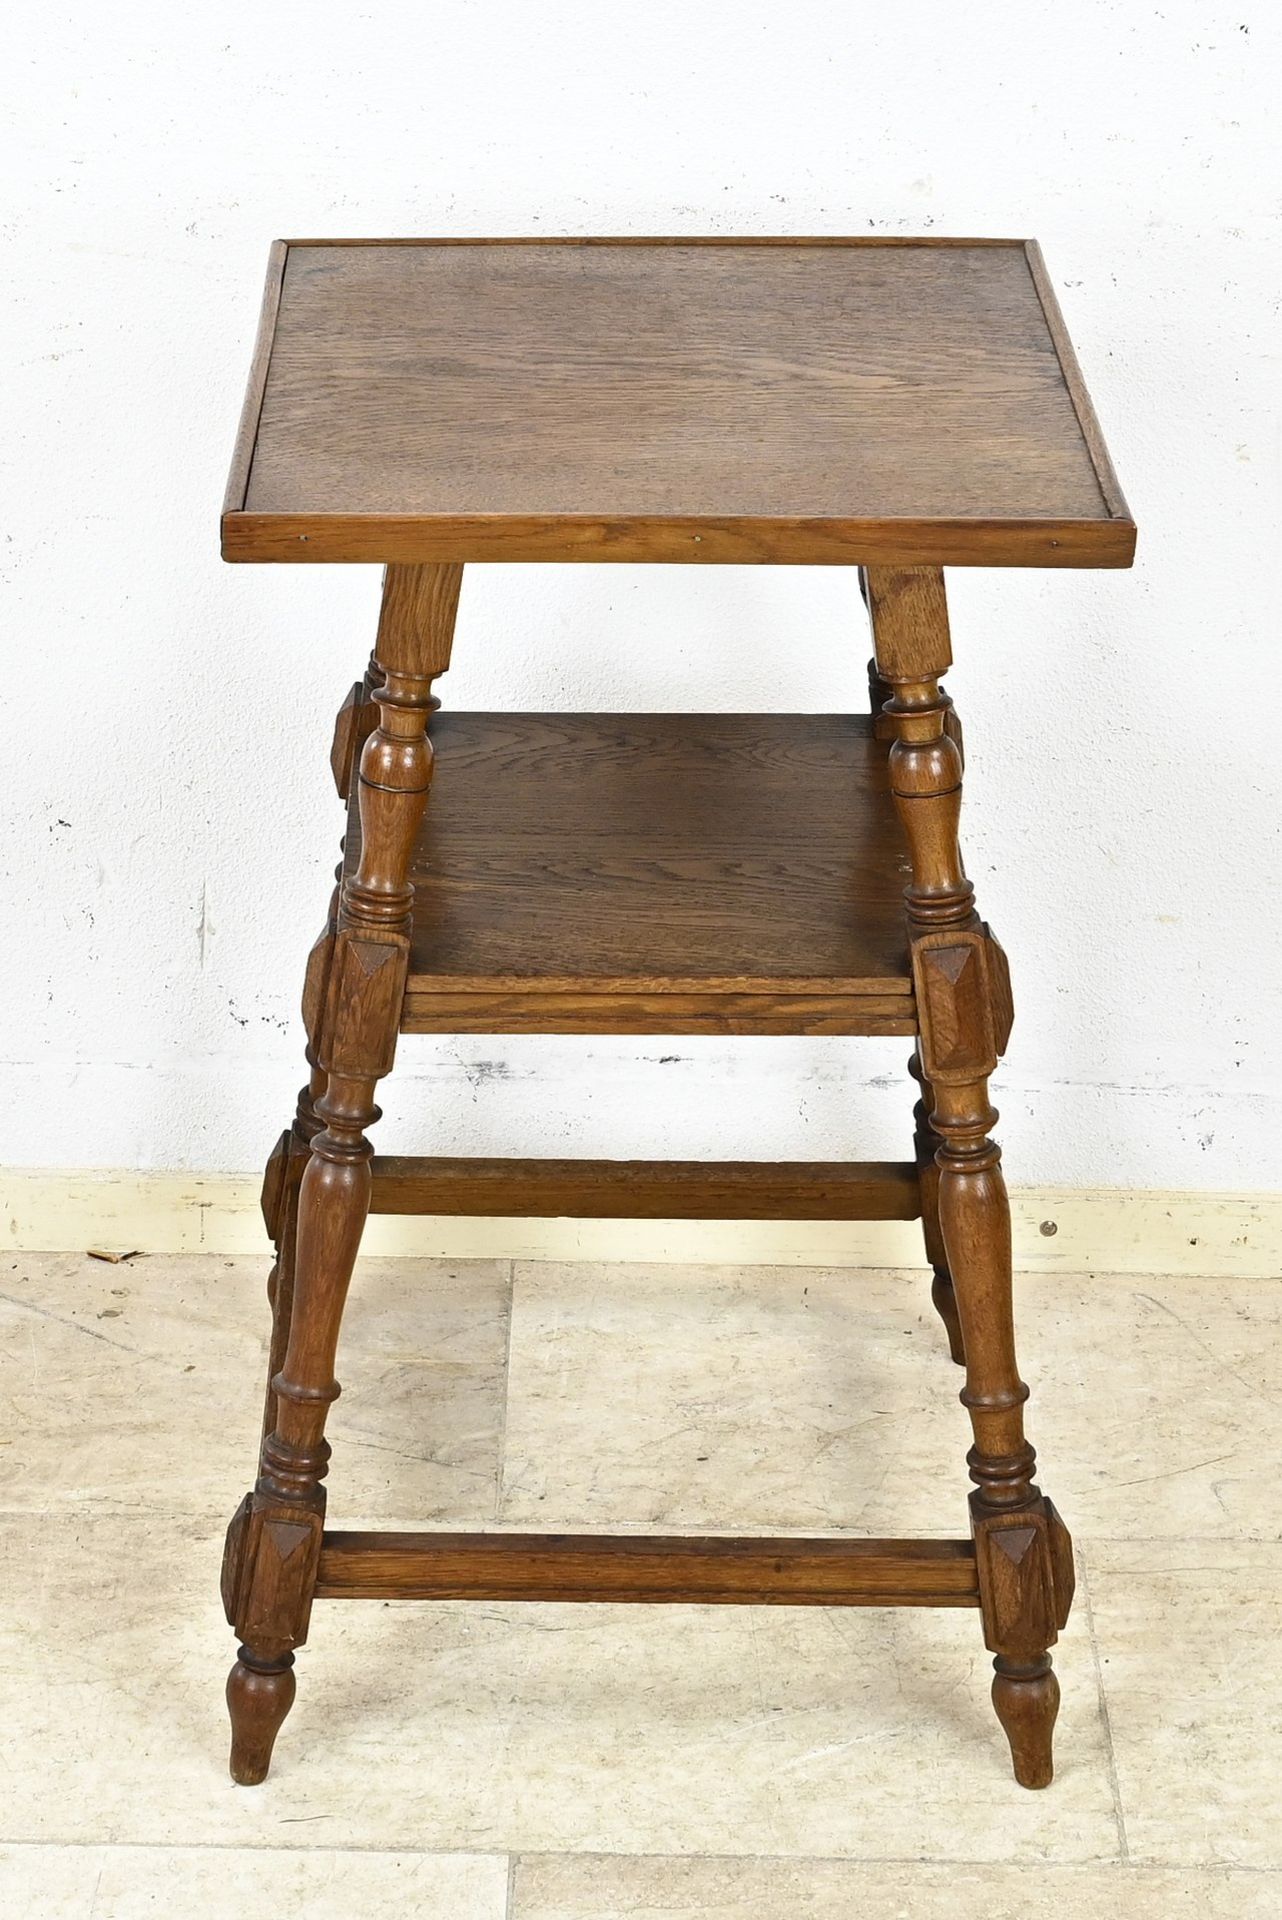 Antique side table, 1890